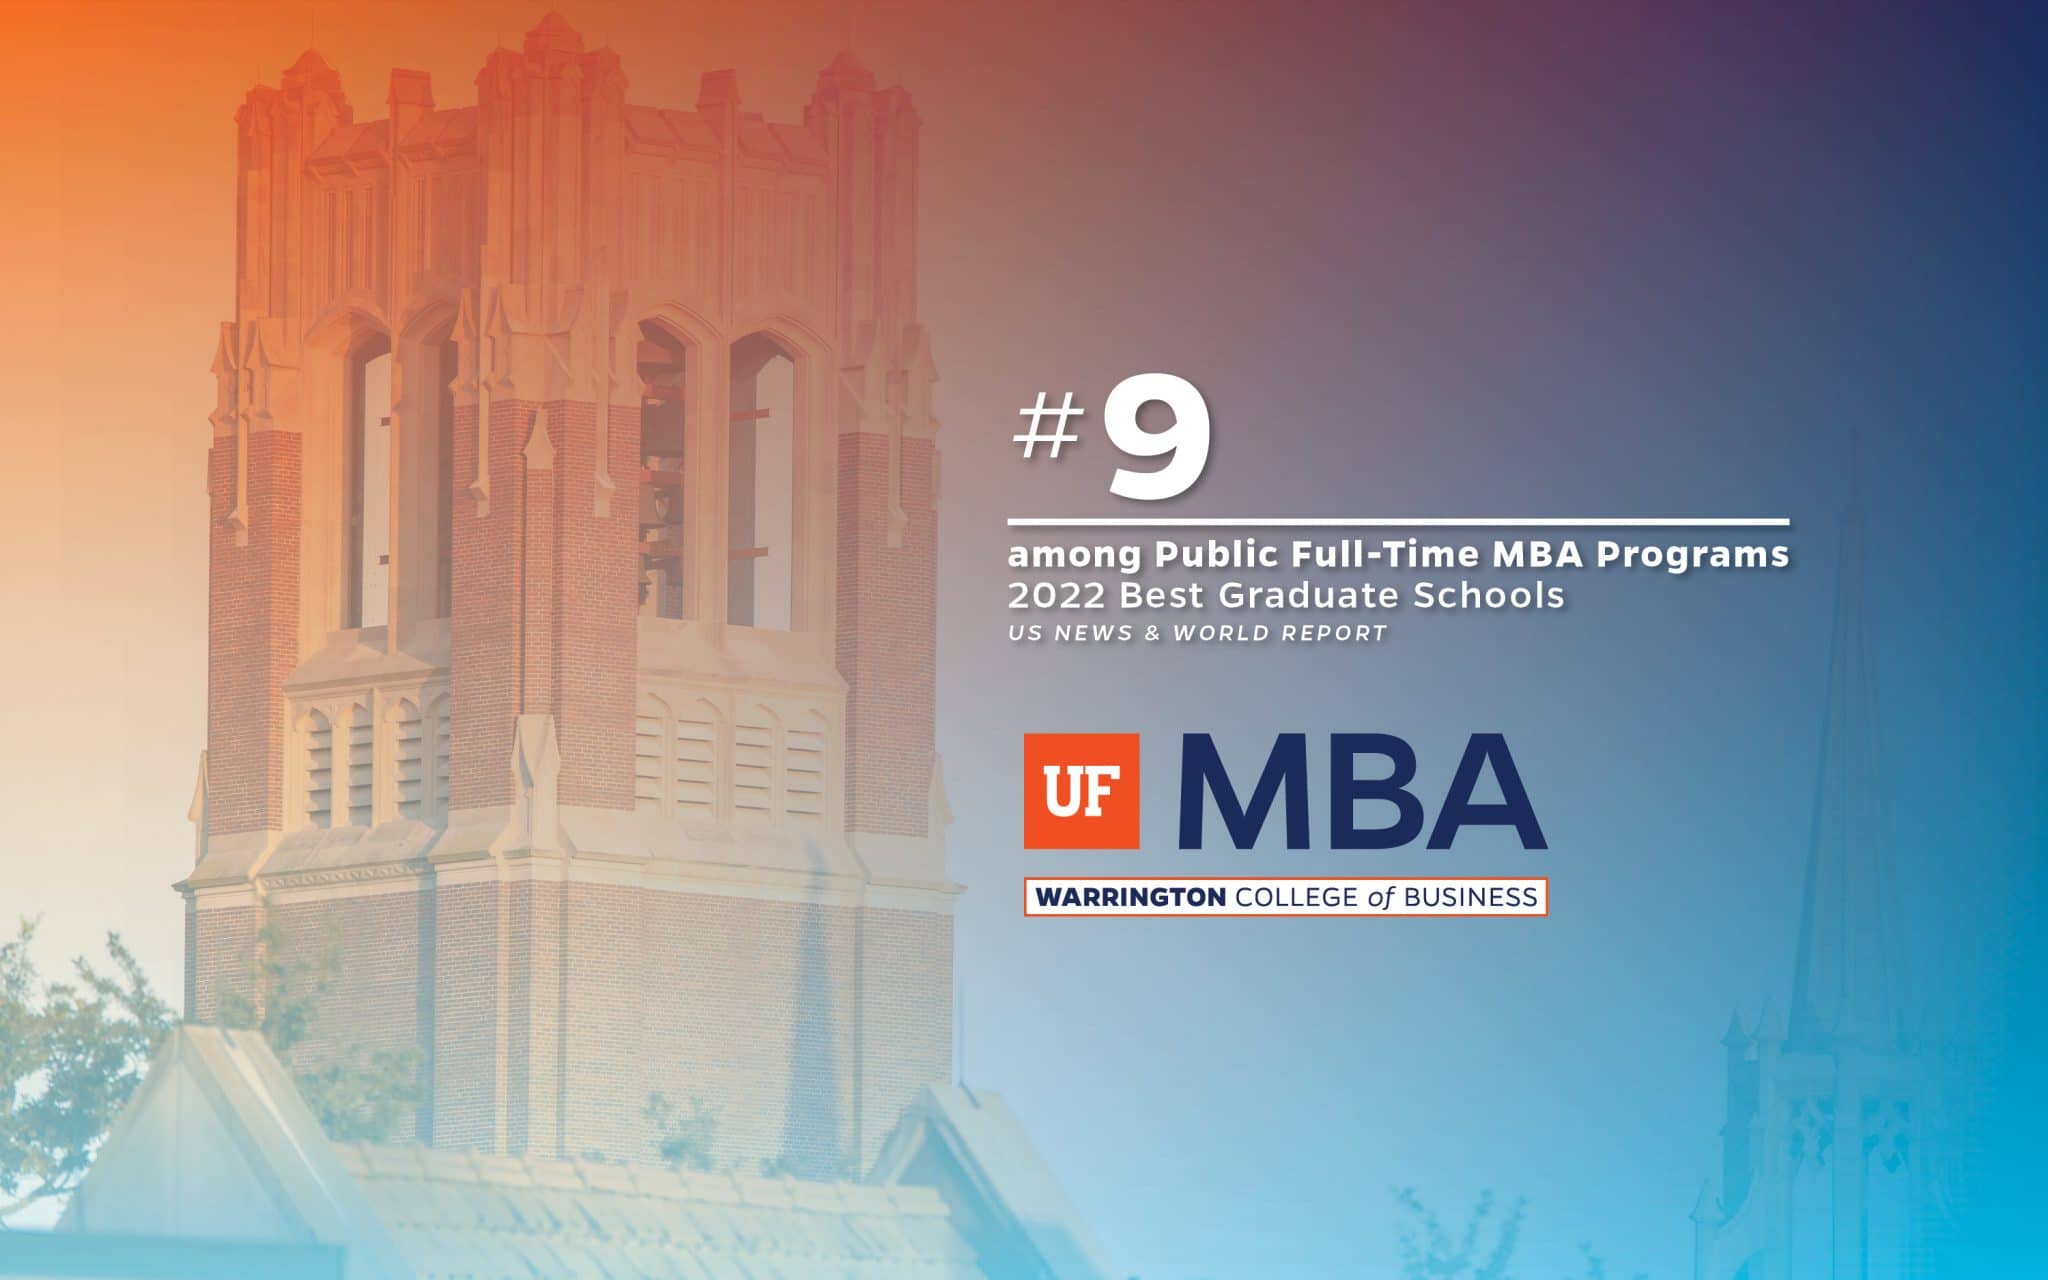 Strong Performance For Uf Mba In Latest Us News Ranking Despite